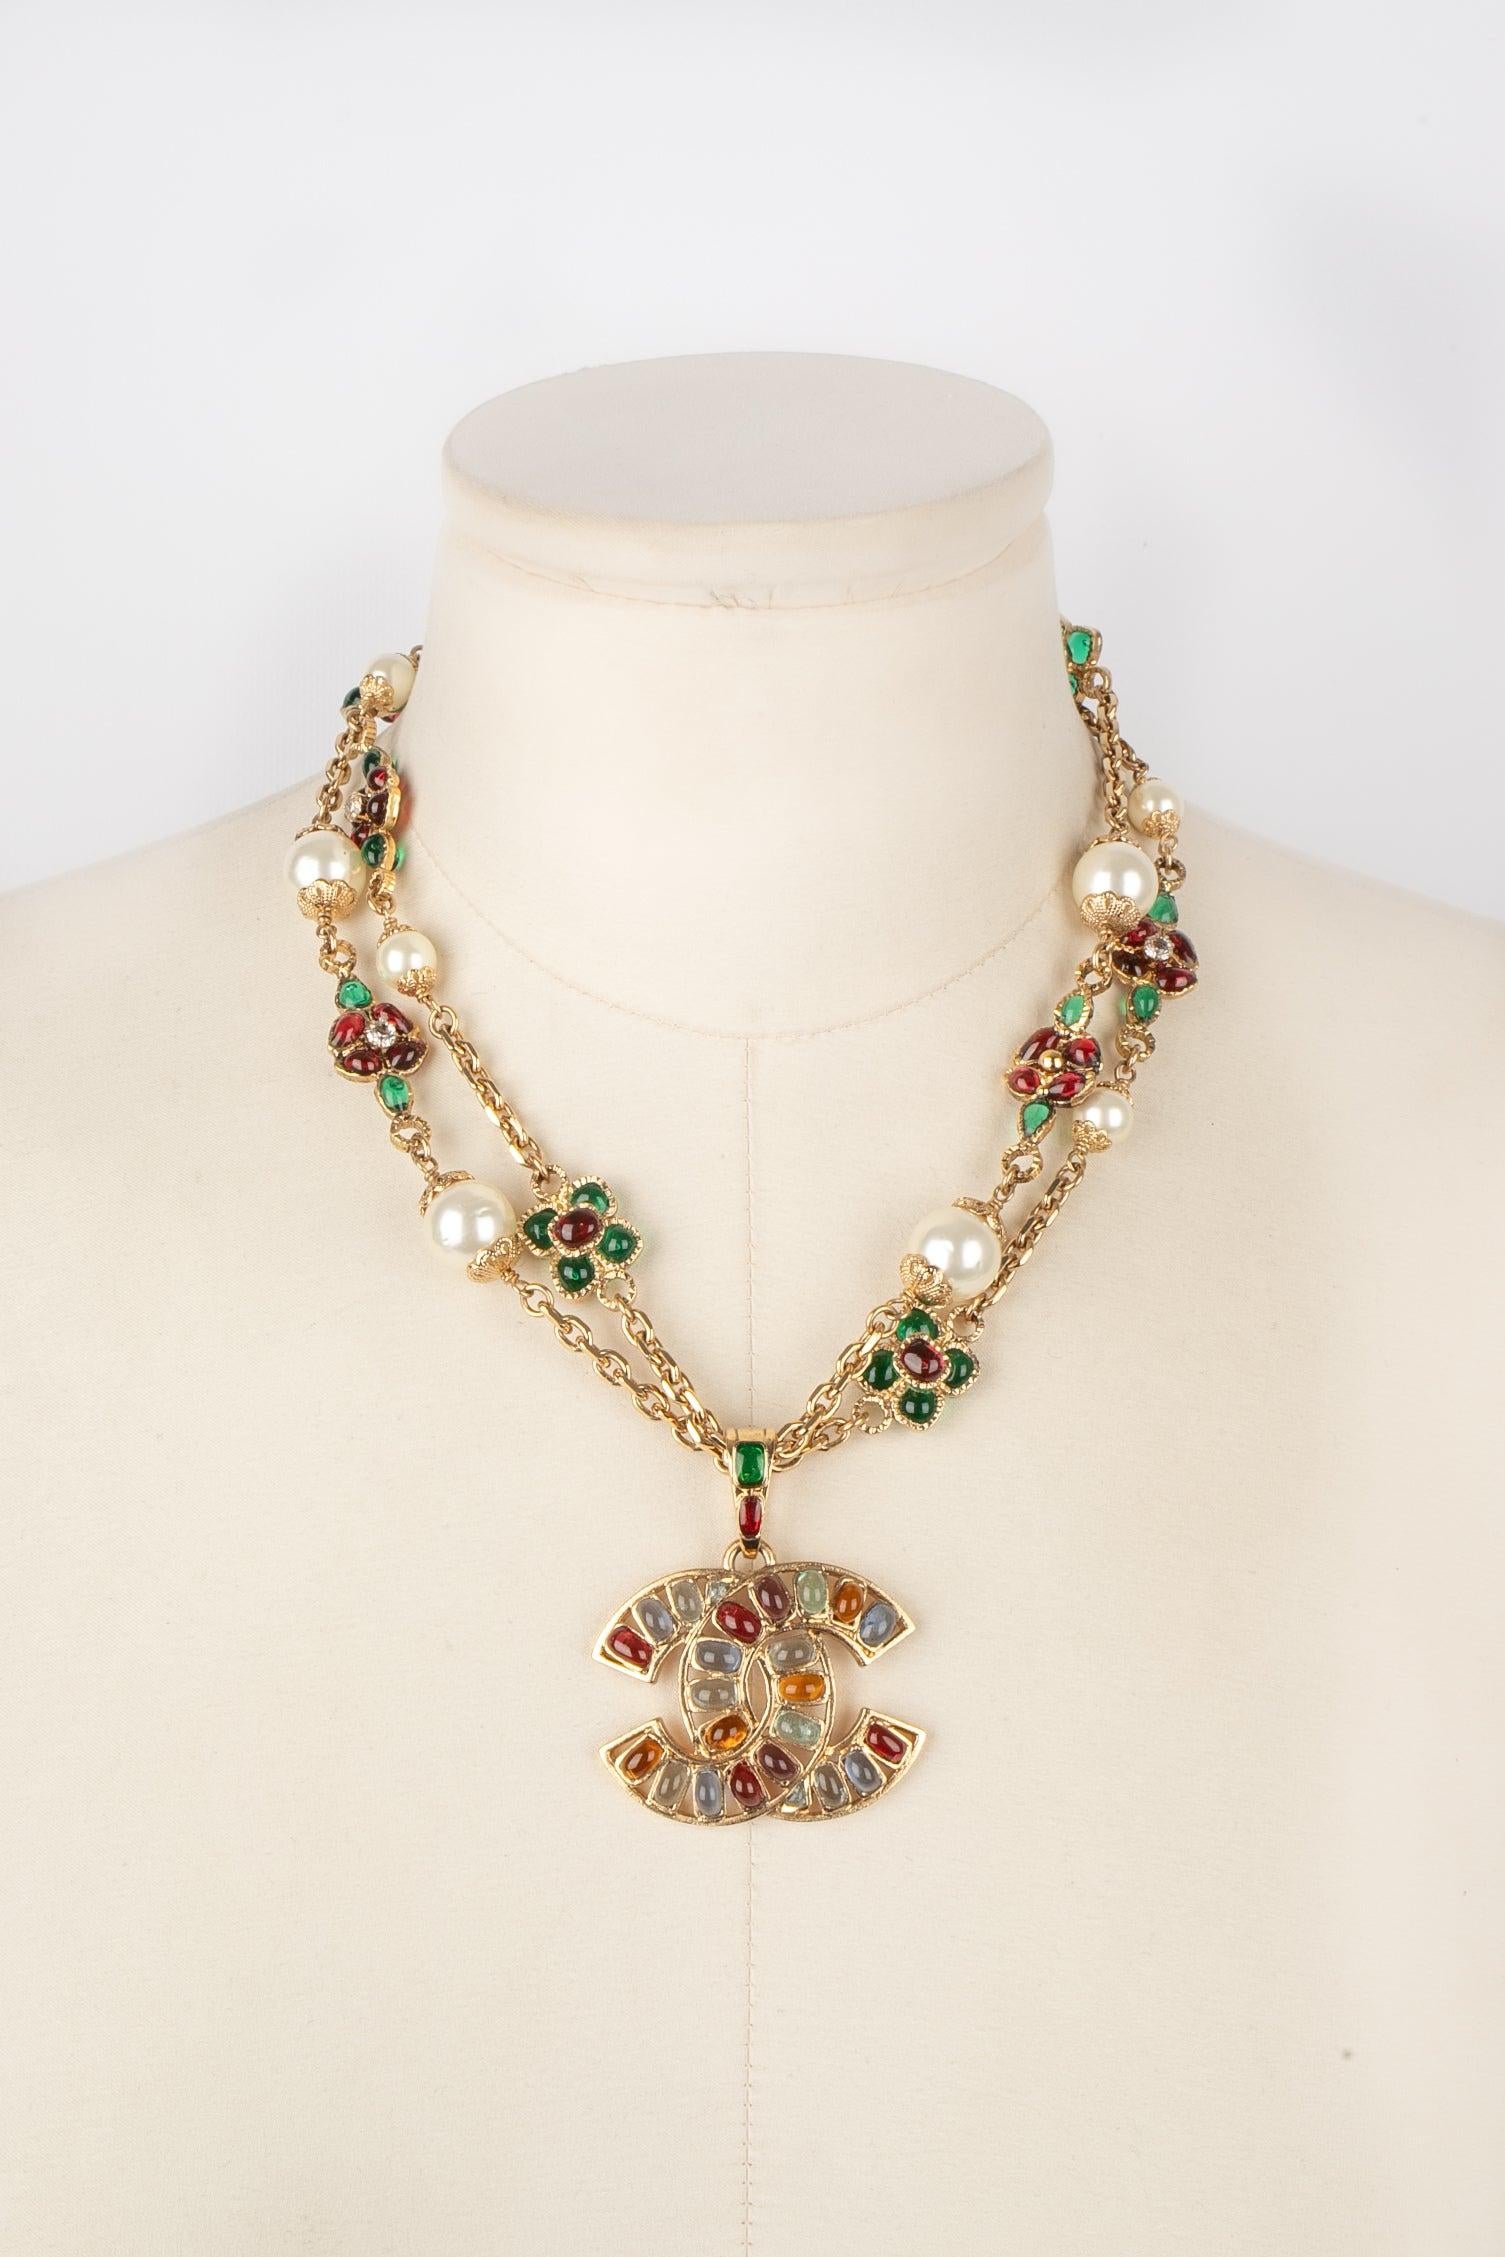 Chanel - (Made in France) Golden metal two-row necklace with costume pearls and glass paste. 2003 Cruise Collection.
 
 Additional information: 
 Condition: Very good condition
 Dimensions: Length: 43 cm
 Period: 21st Century
 
 Seller Reference: